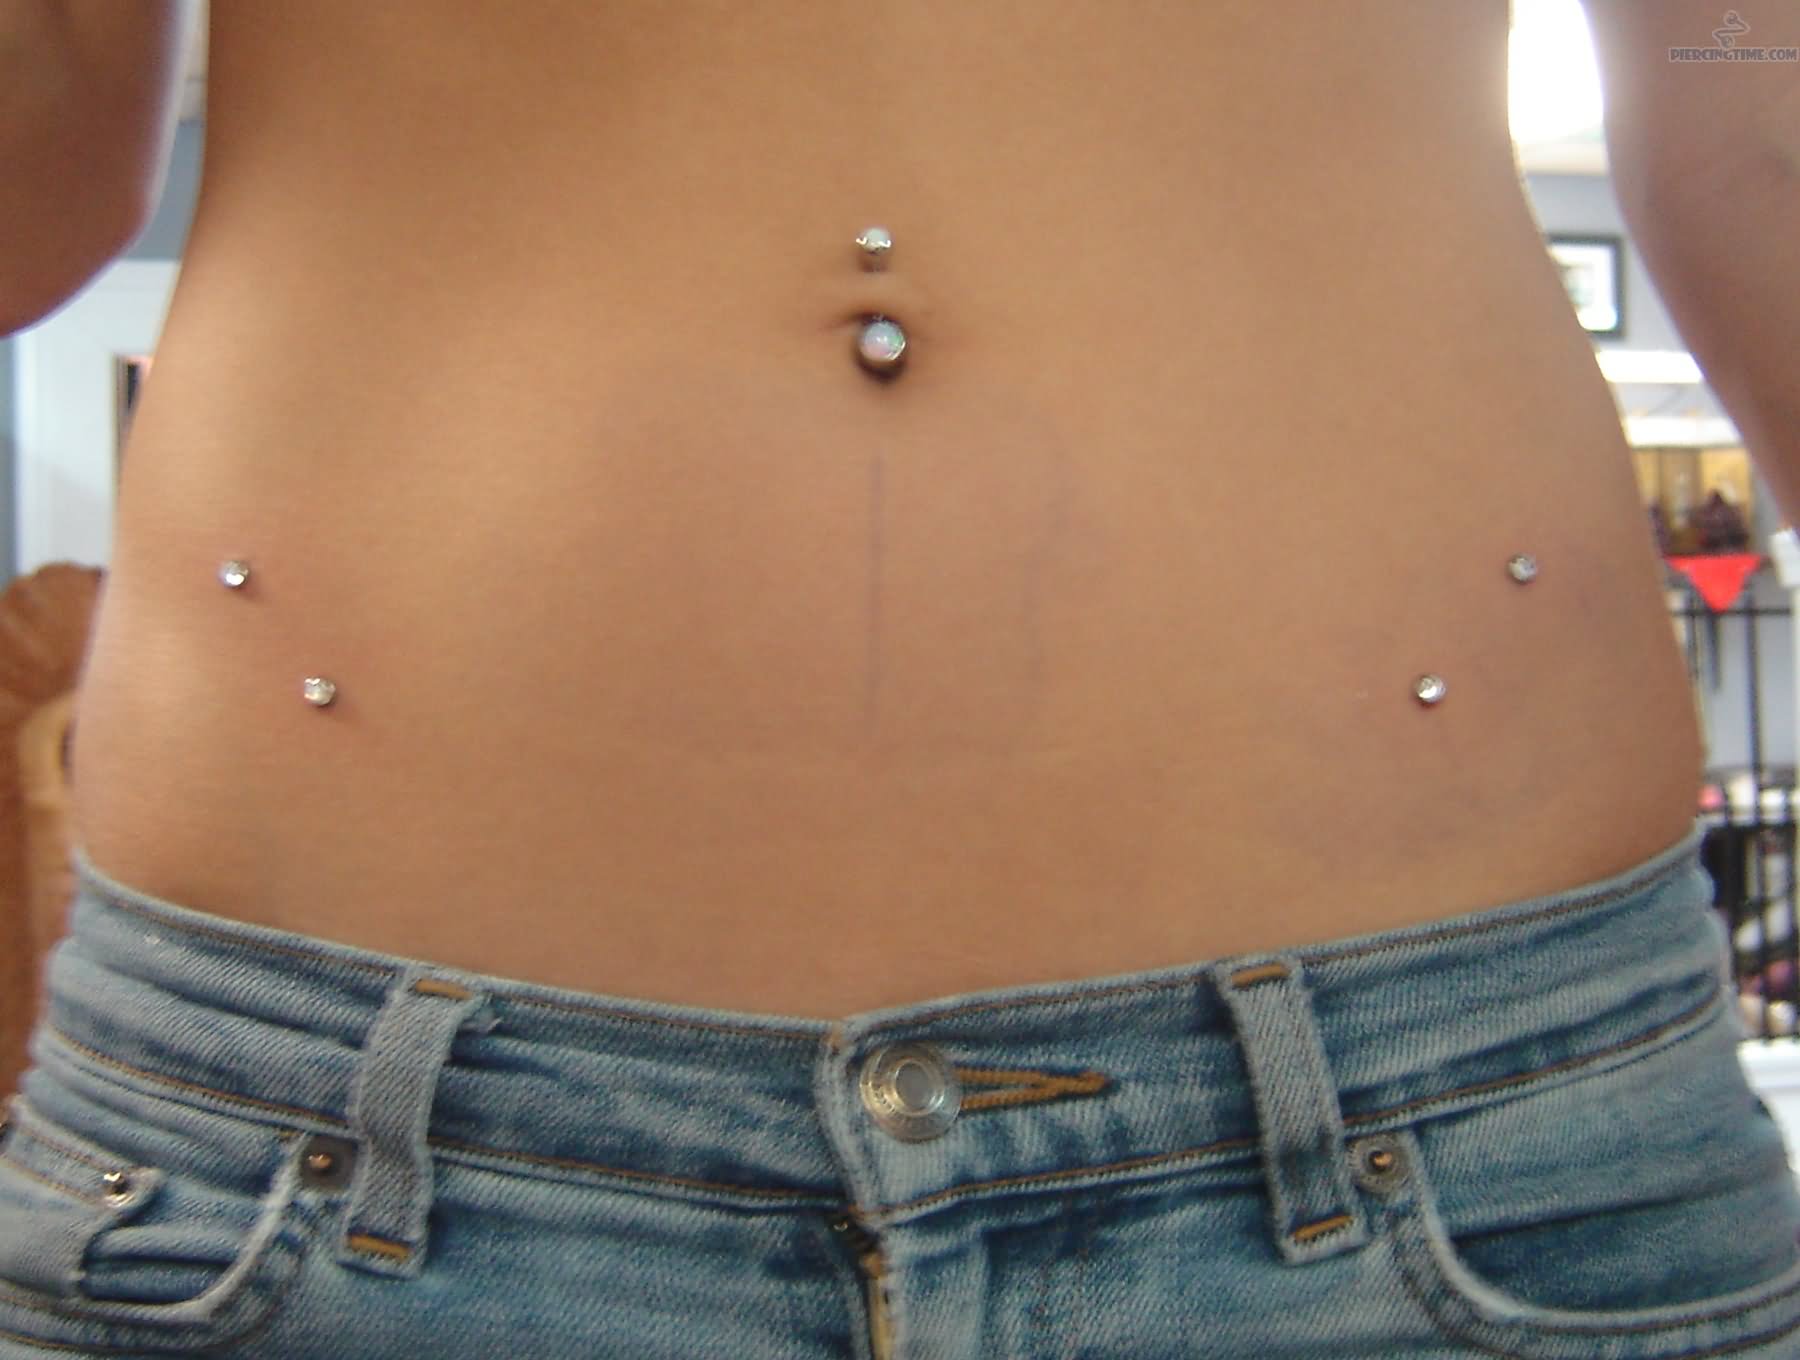 Girl With Belly Piercing And Hip Piercing With Dermal Anchors